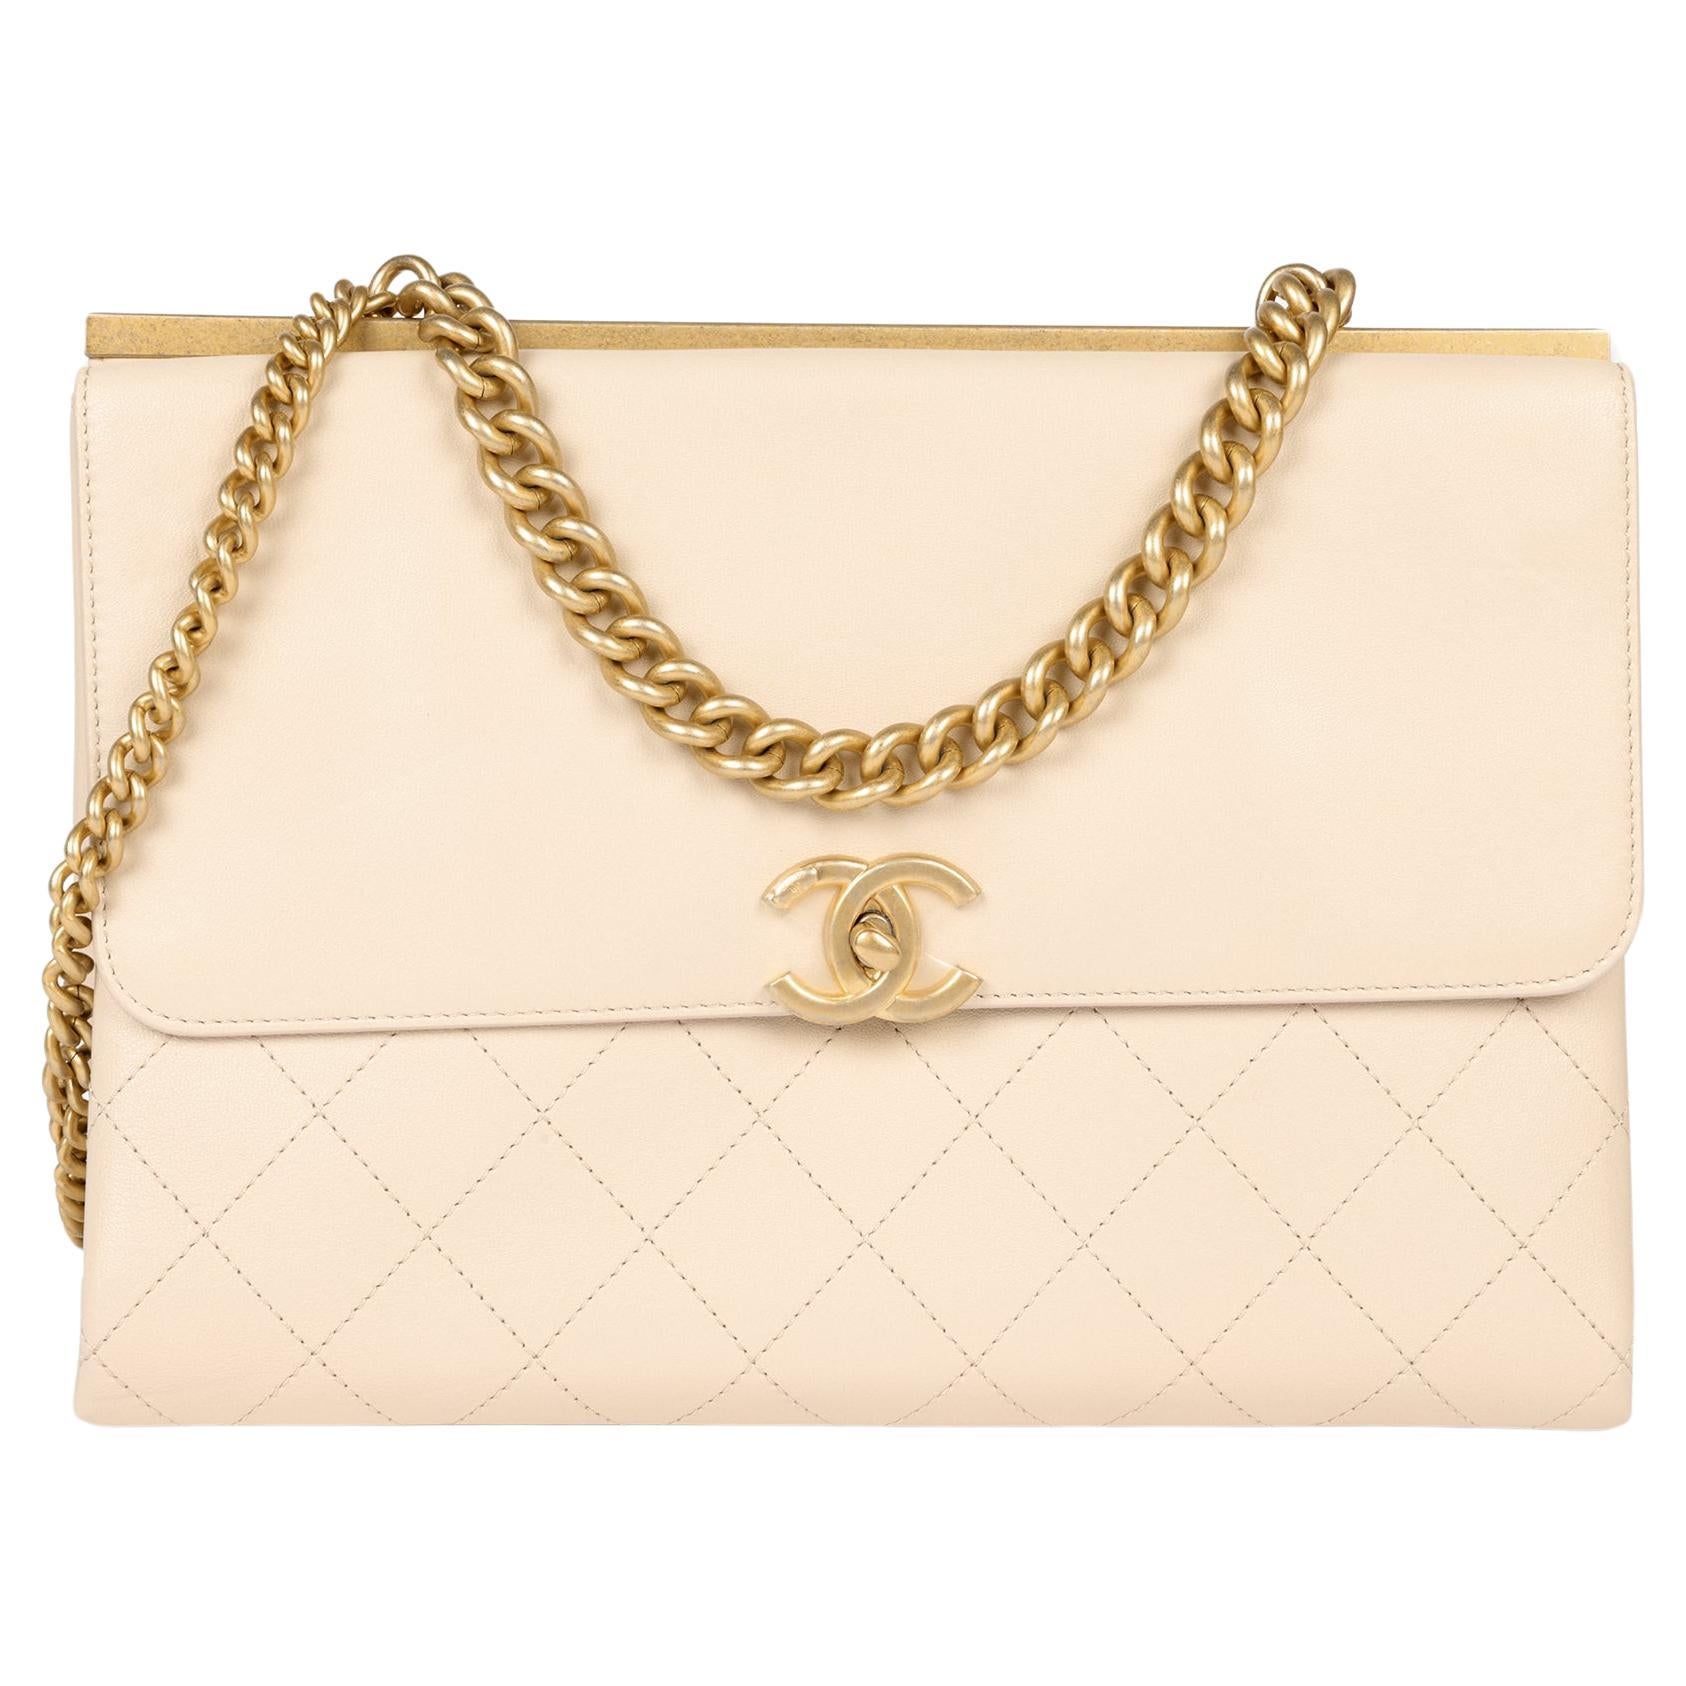 Chanel Beige Smooth & Quilted Calfskin Leather Small Coco Luxe Bag For Sale